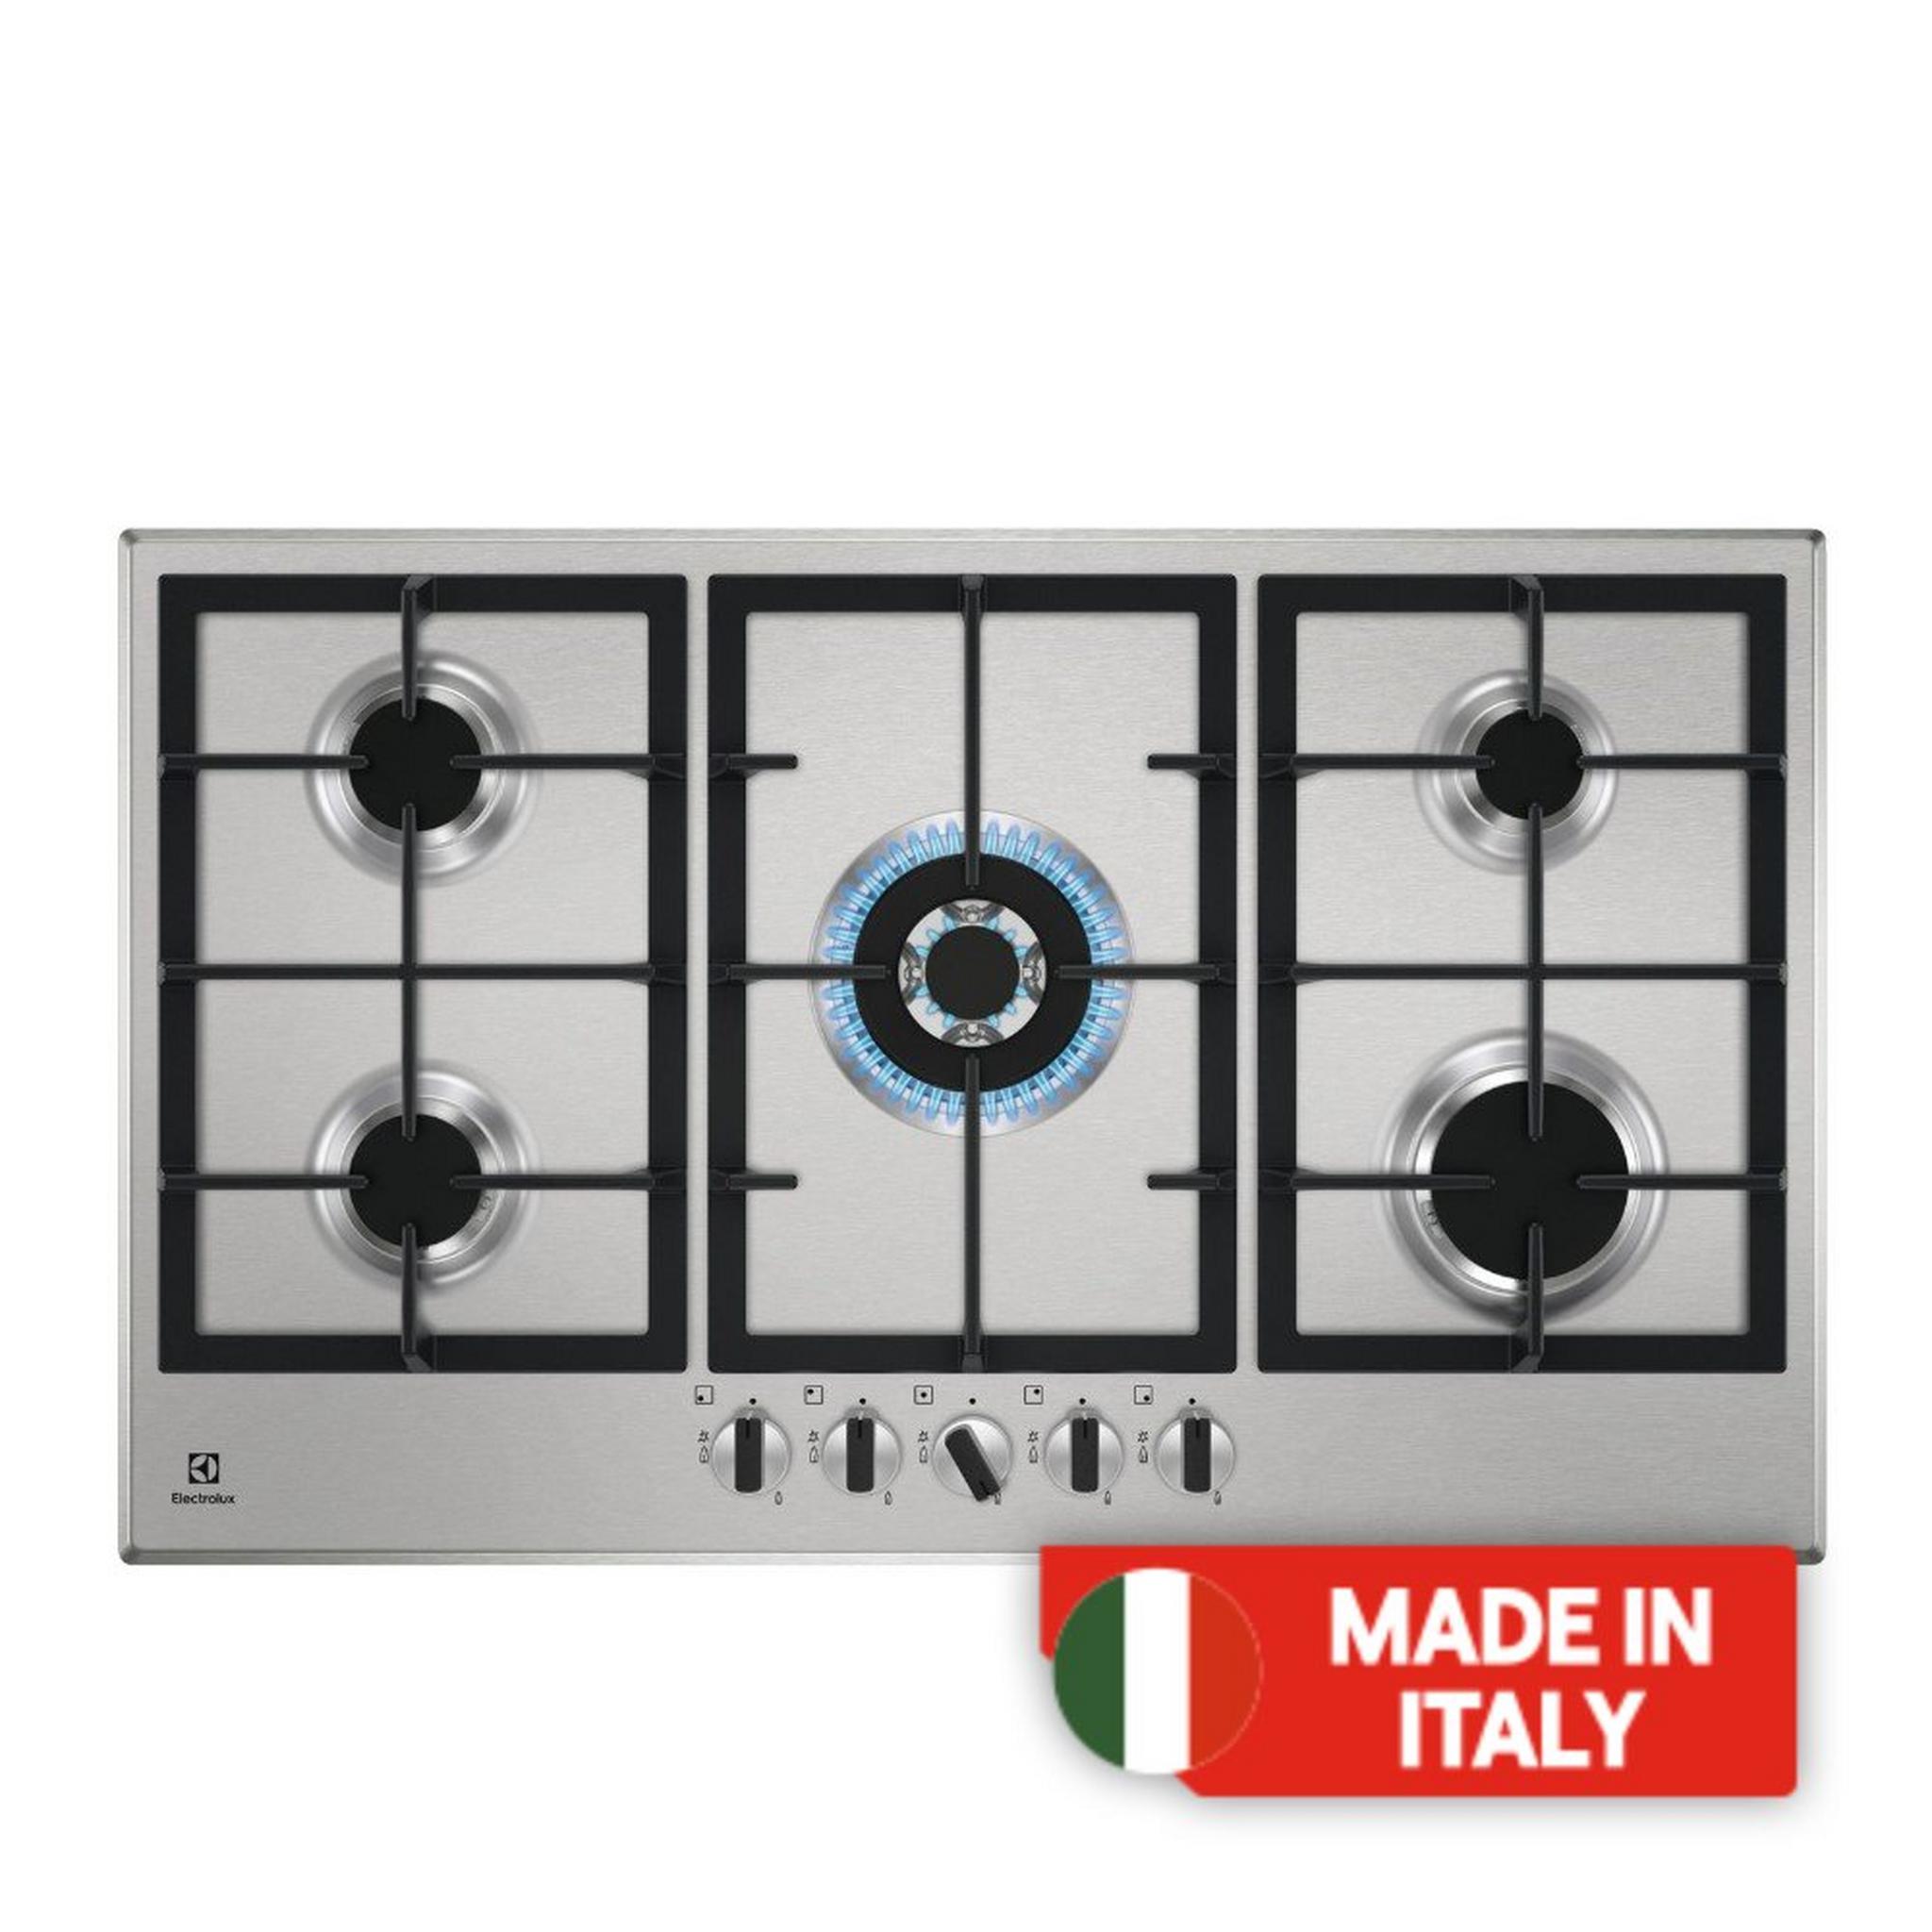 ELECTROLUX 5 Burners Built-in Gas Hob, 90cm, KGS9536X - Stainless Steel